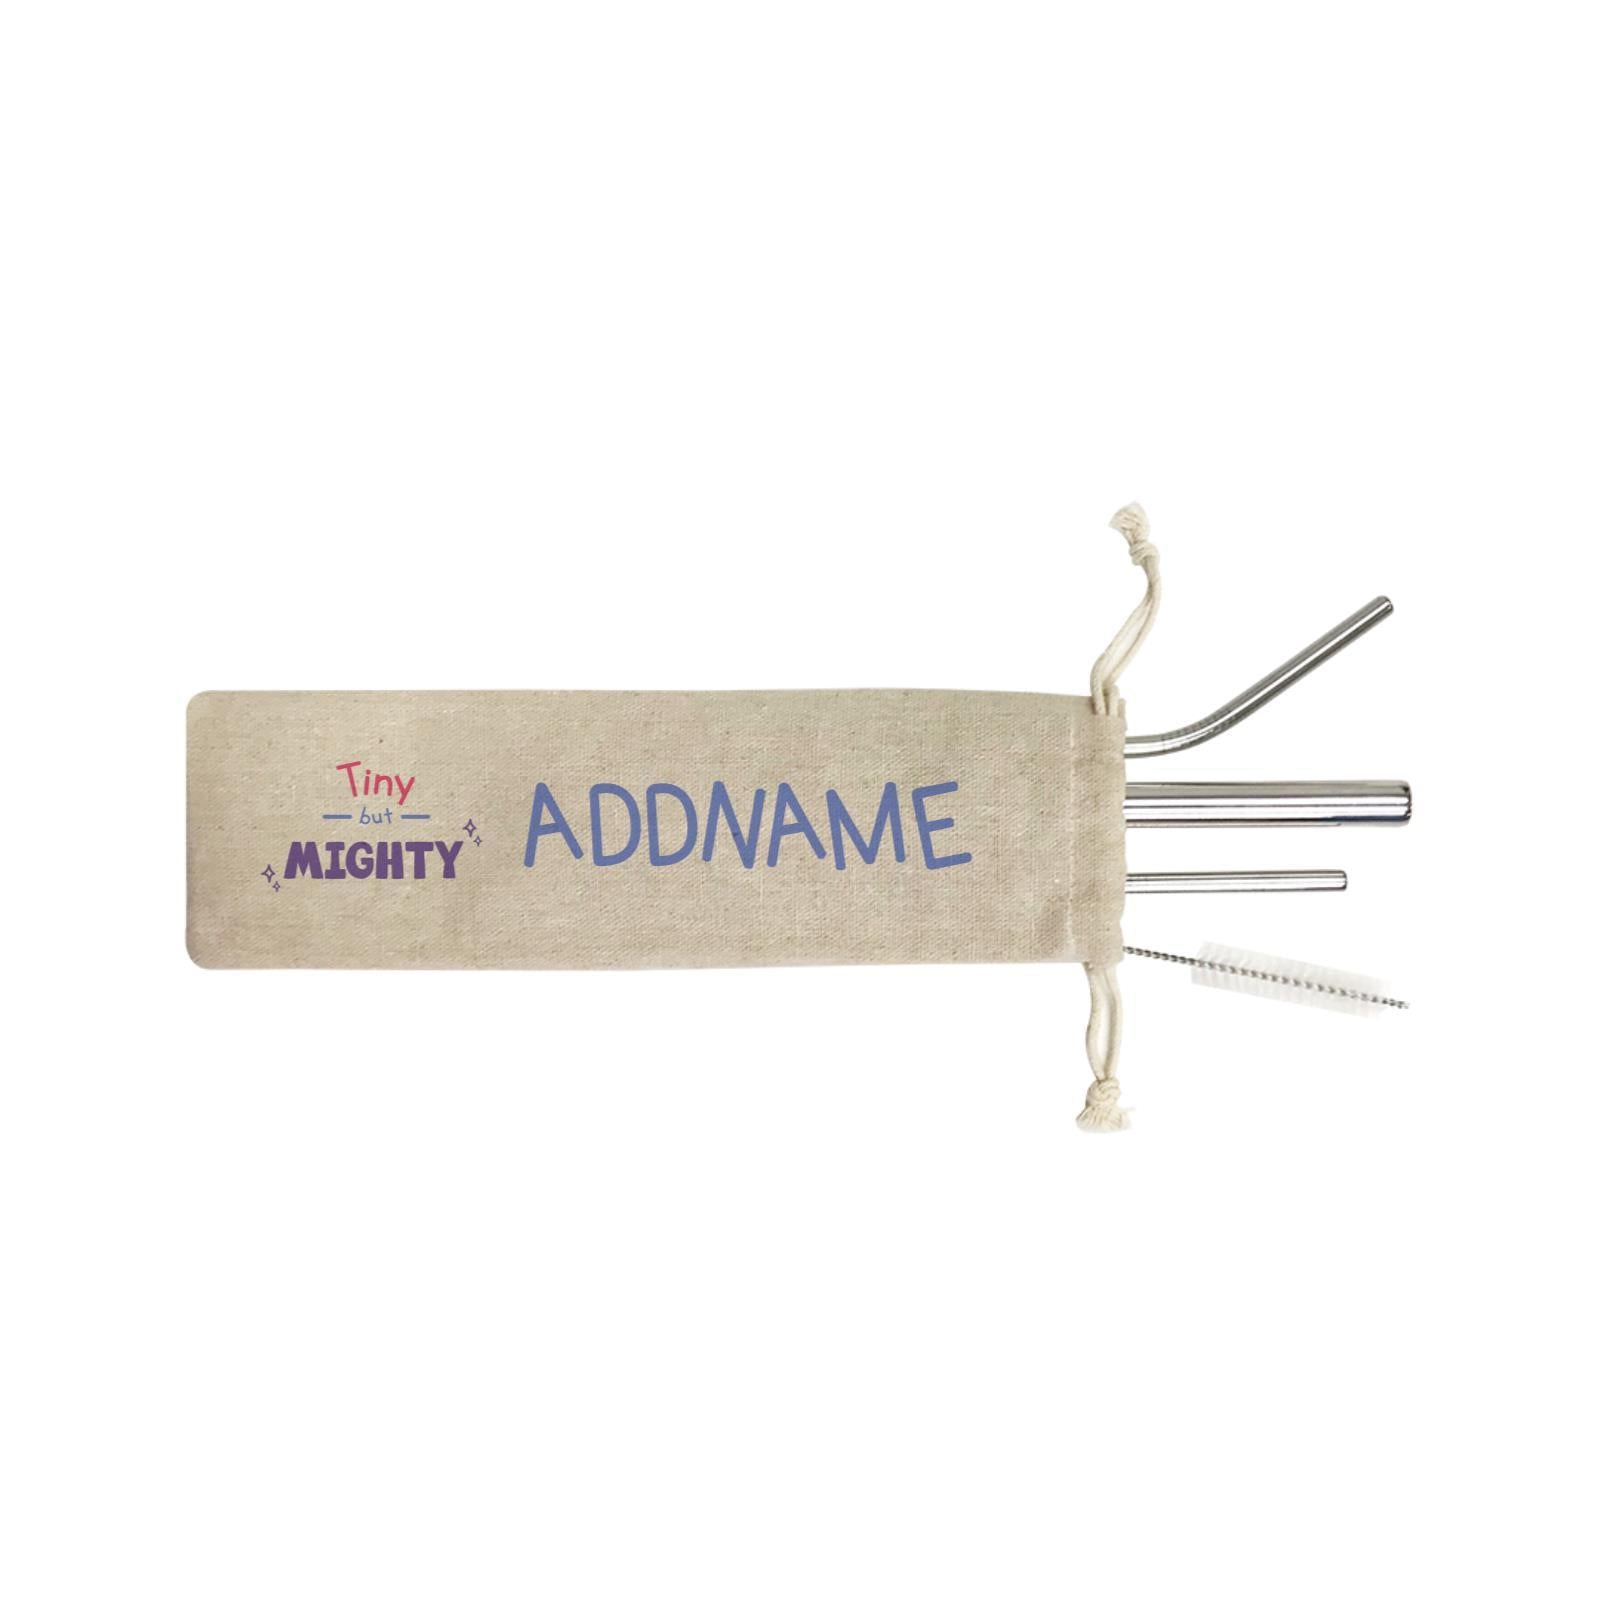 Children's Day Gift Series Tiny But Mighty Addname SB 4-in-1 Stainless Steel Straw Set In a Satchel